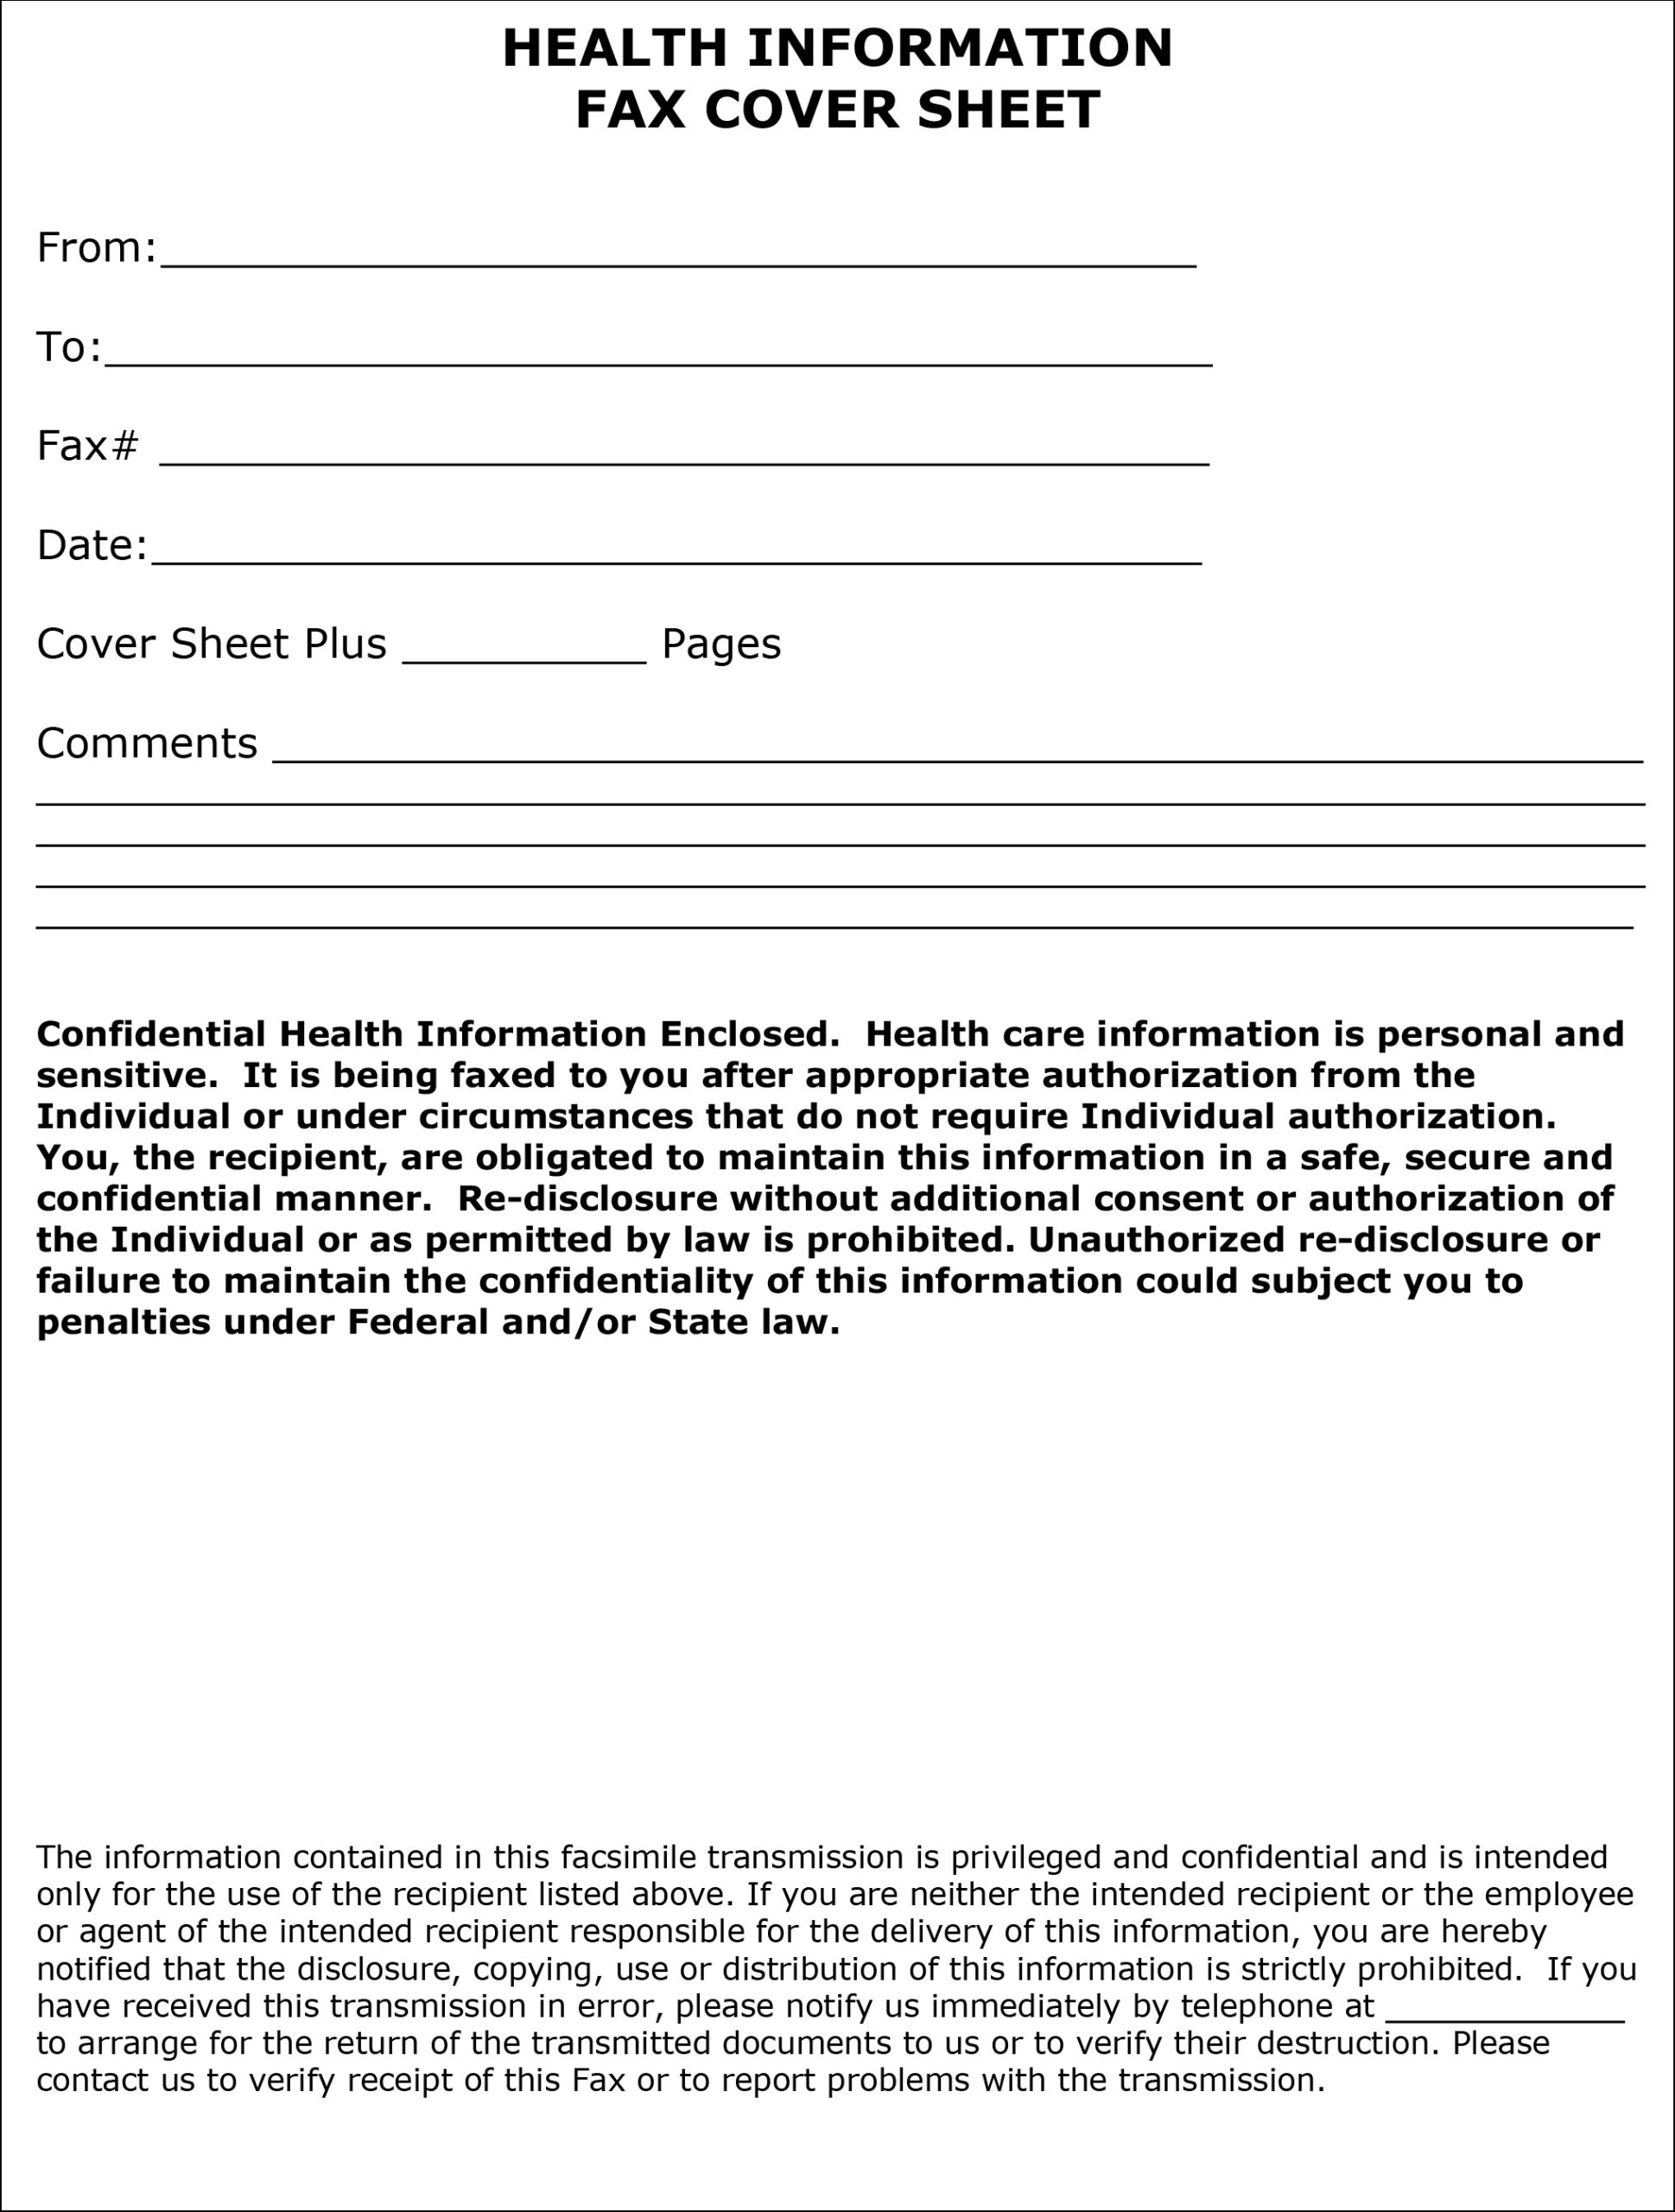 Free Medical Fax Cover Sheet